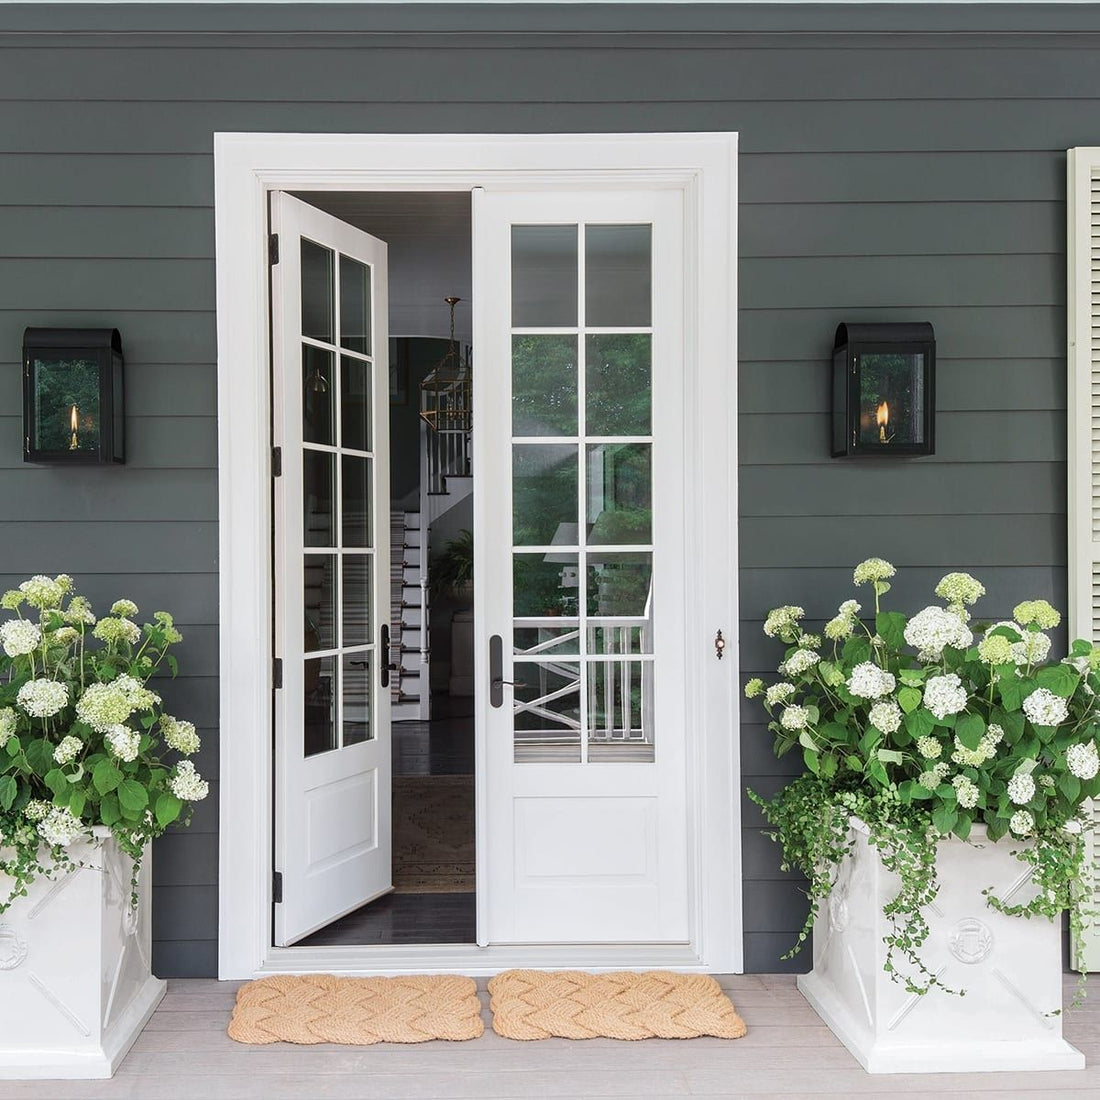 dark green house with white french doors